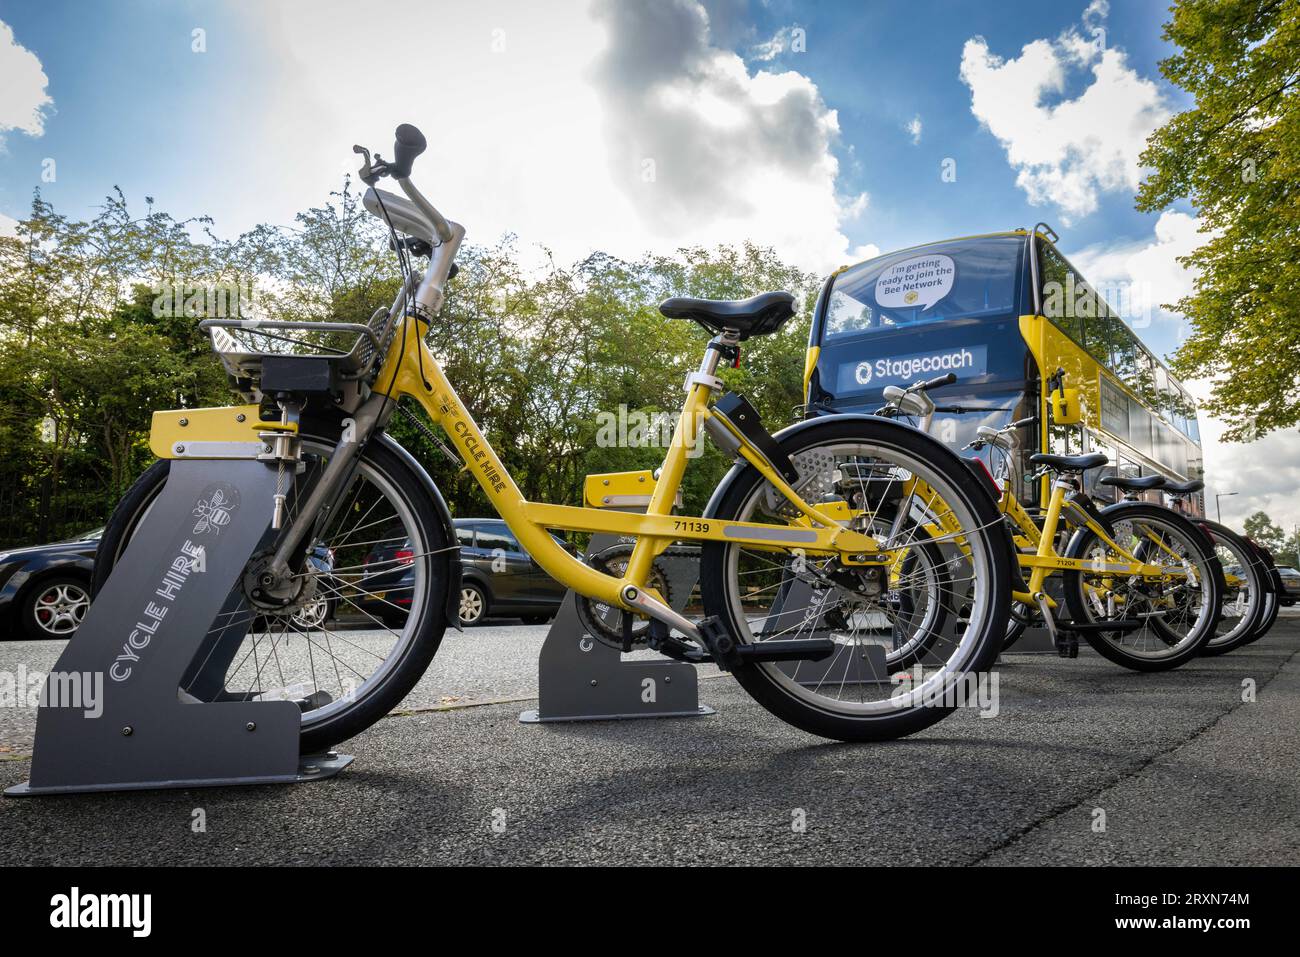 Greater Manchester’s first publicly operated, self service, 24/7 bike hire scheme is running in parts of Manchester, Trafford and Salford. Stock Photo